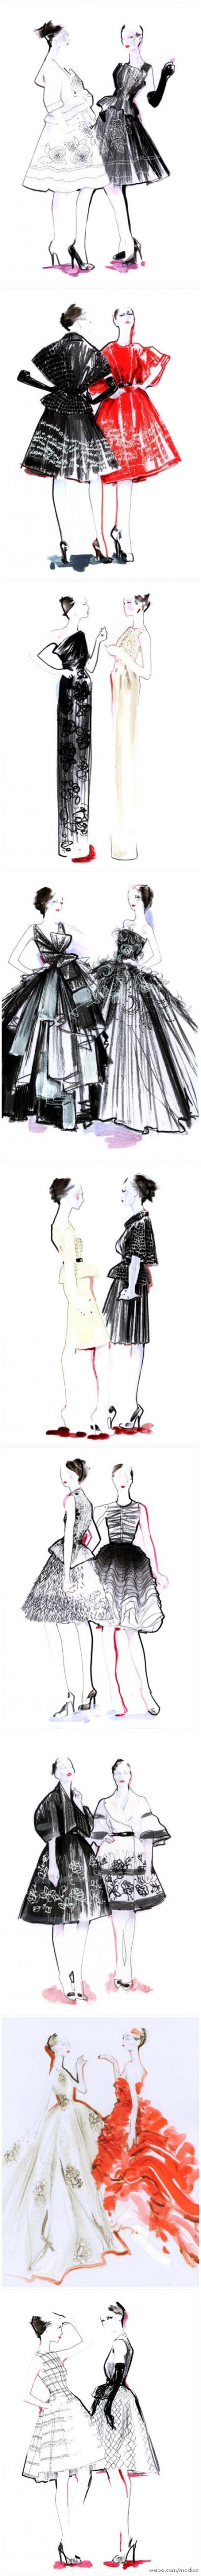 Christian Dior Haute Couture 2012 S/S by Bill Gaytten drawings.